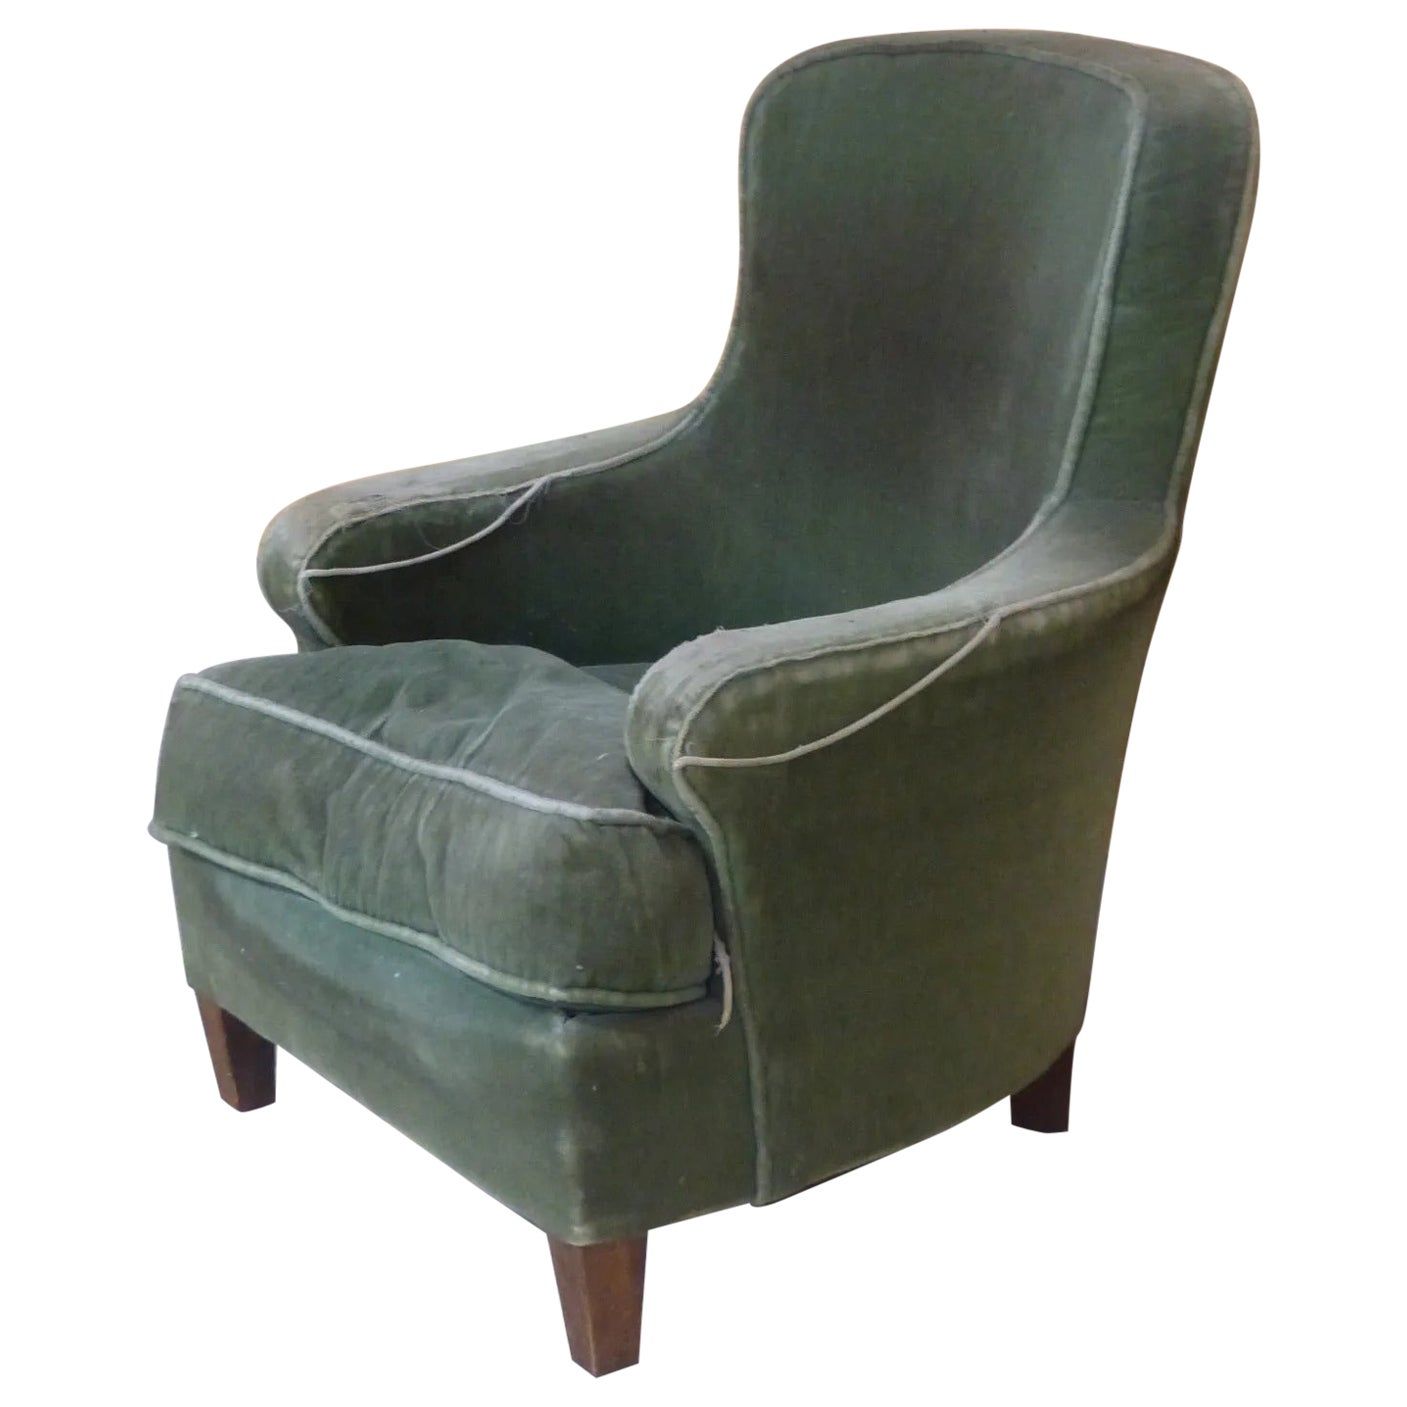 Maison JANSEN (attributed to) neo-classical velvet armchair circa 1940/1950 For Sale